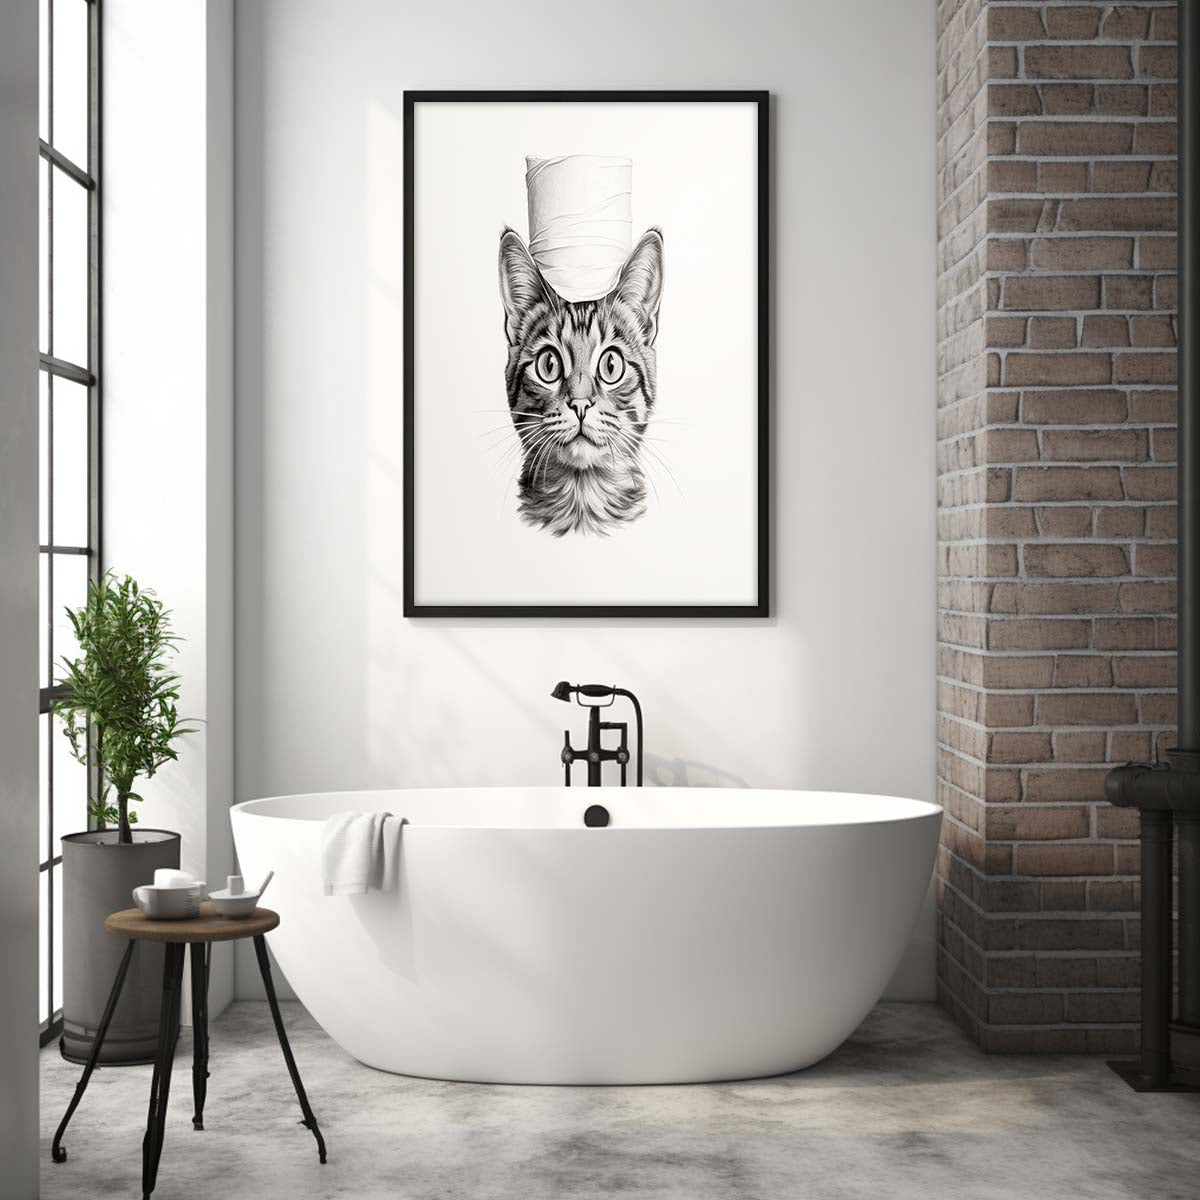 Cute Cat With Toilet Paper, Canvas Or Poster, Funny Cat Art, Bathroom Wall Decor, Home Decor, Bathroom Wall Art, Cat Wall Decor, Animal Decor, Pet Gift, Pet Illustration, Digital Download